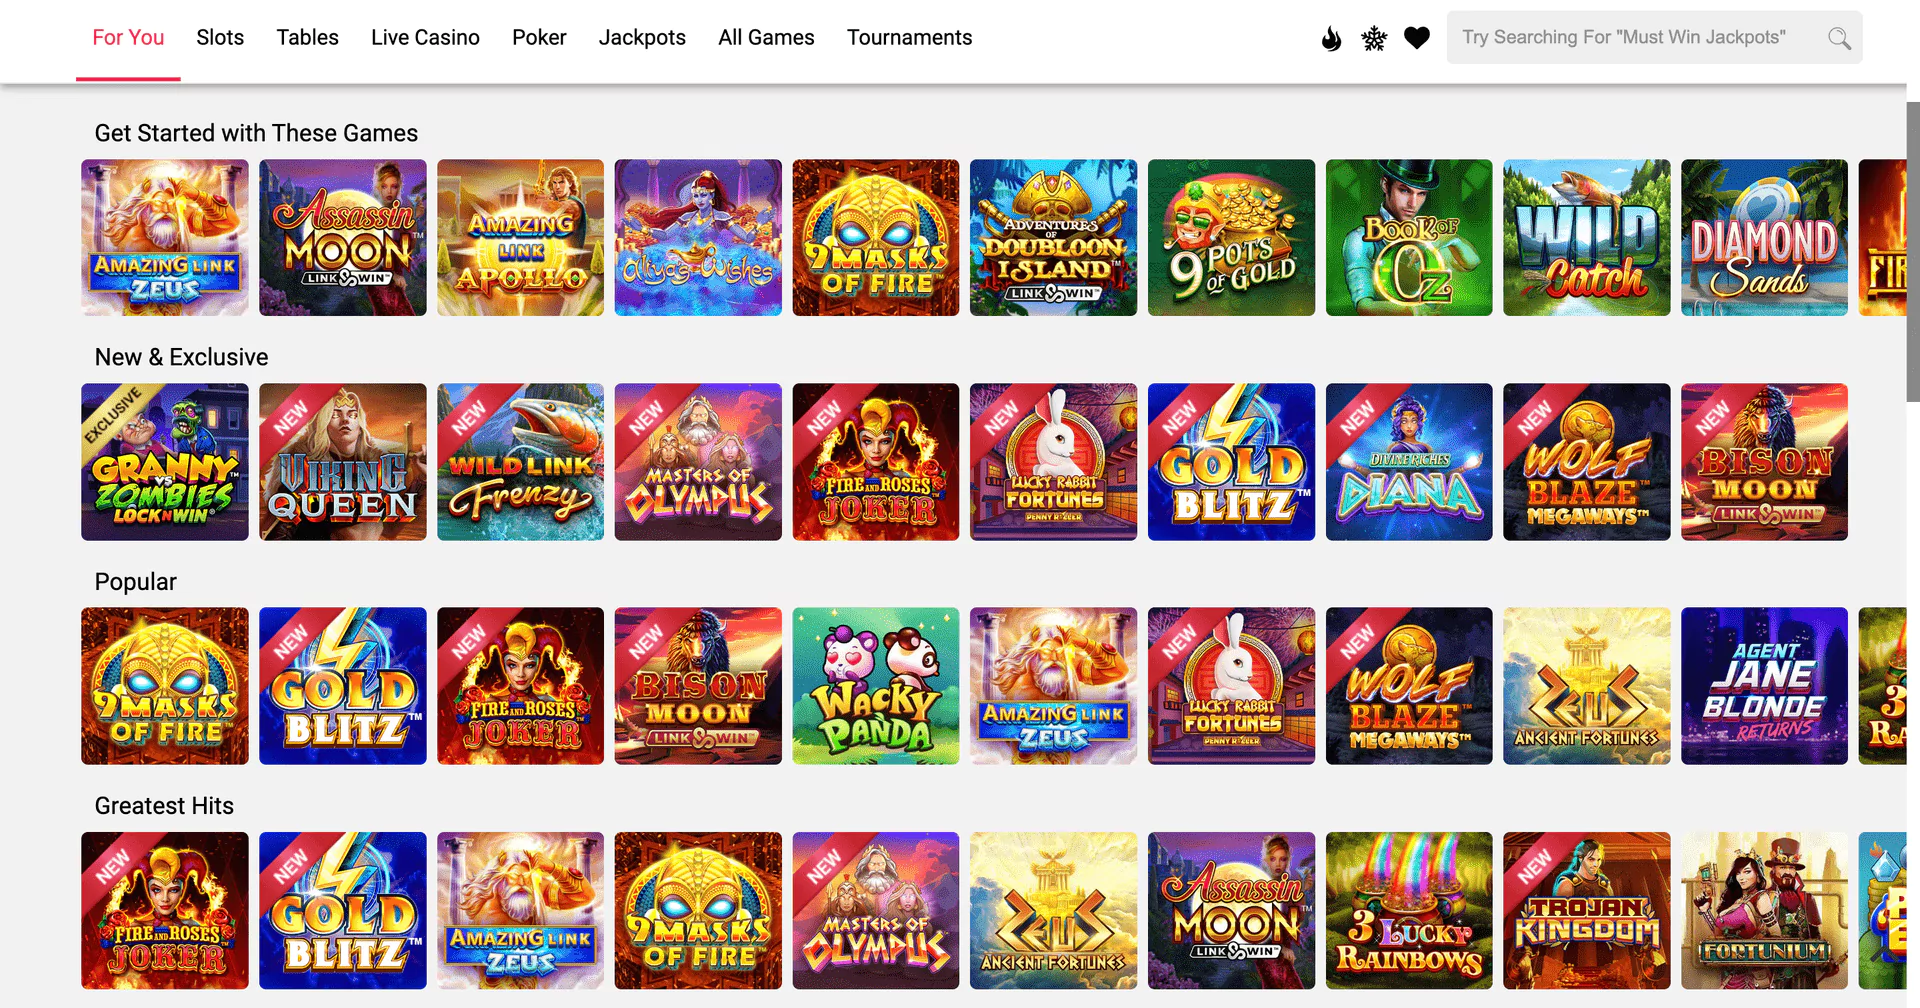 Games at Spin Casino